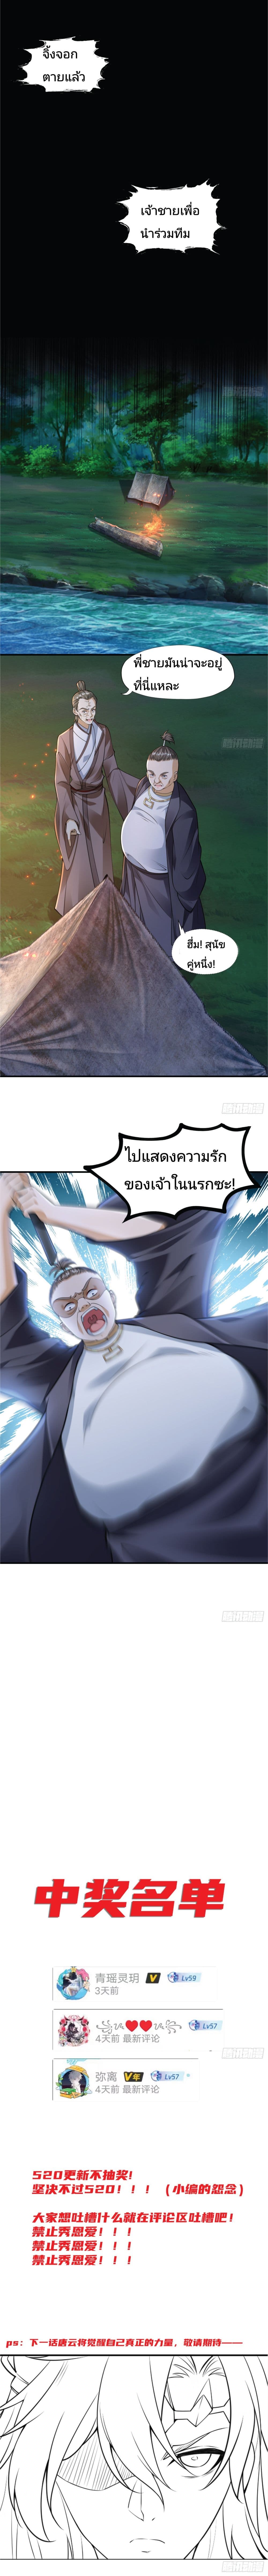 The Strongest Brother 9 แปลไทย